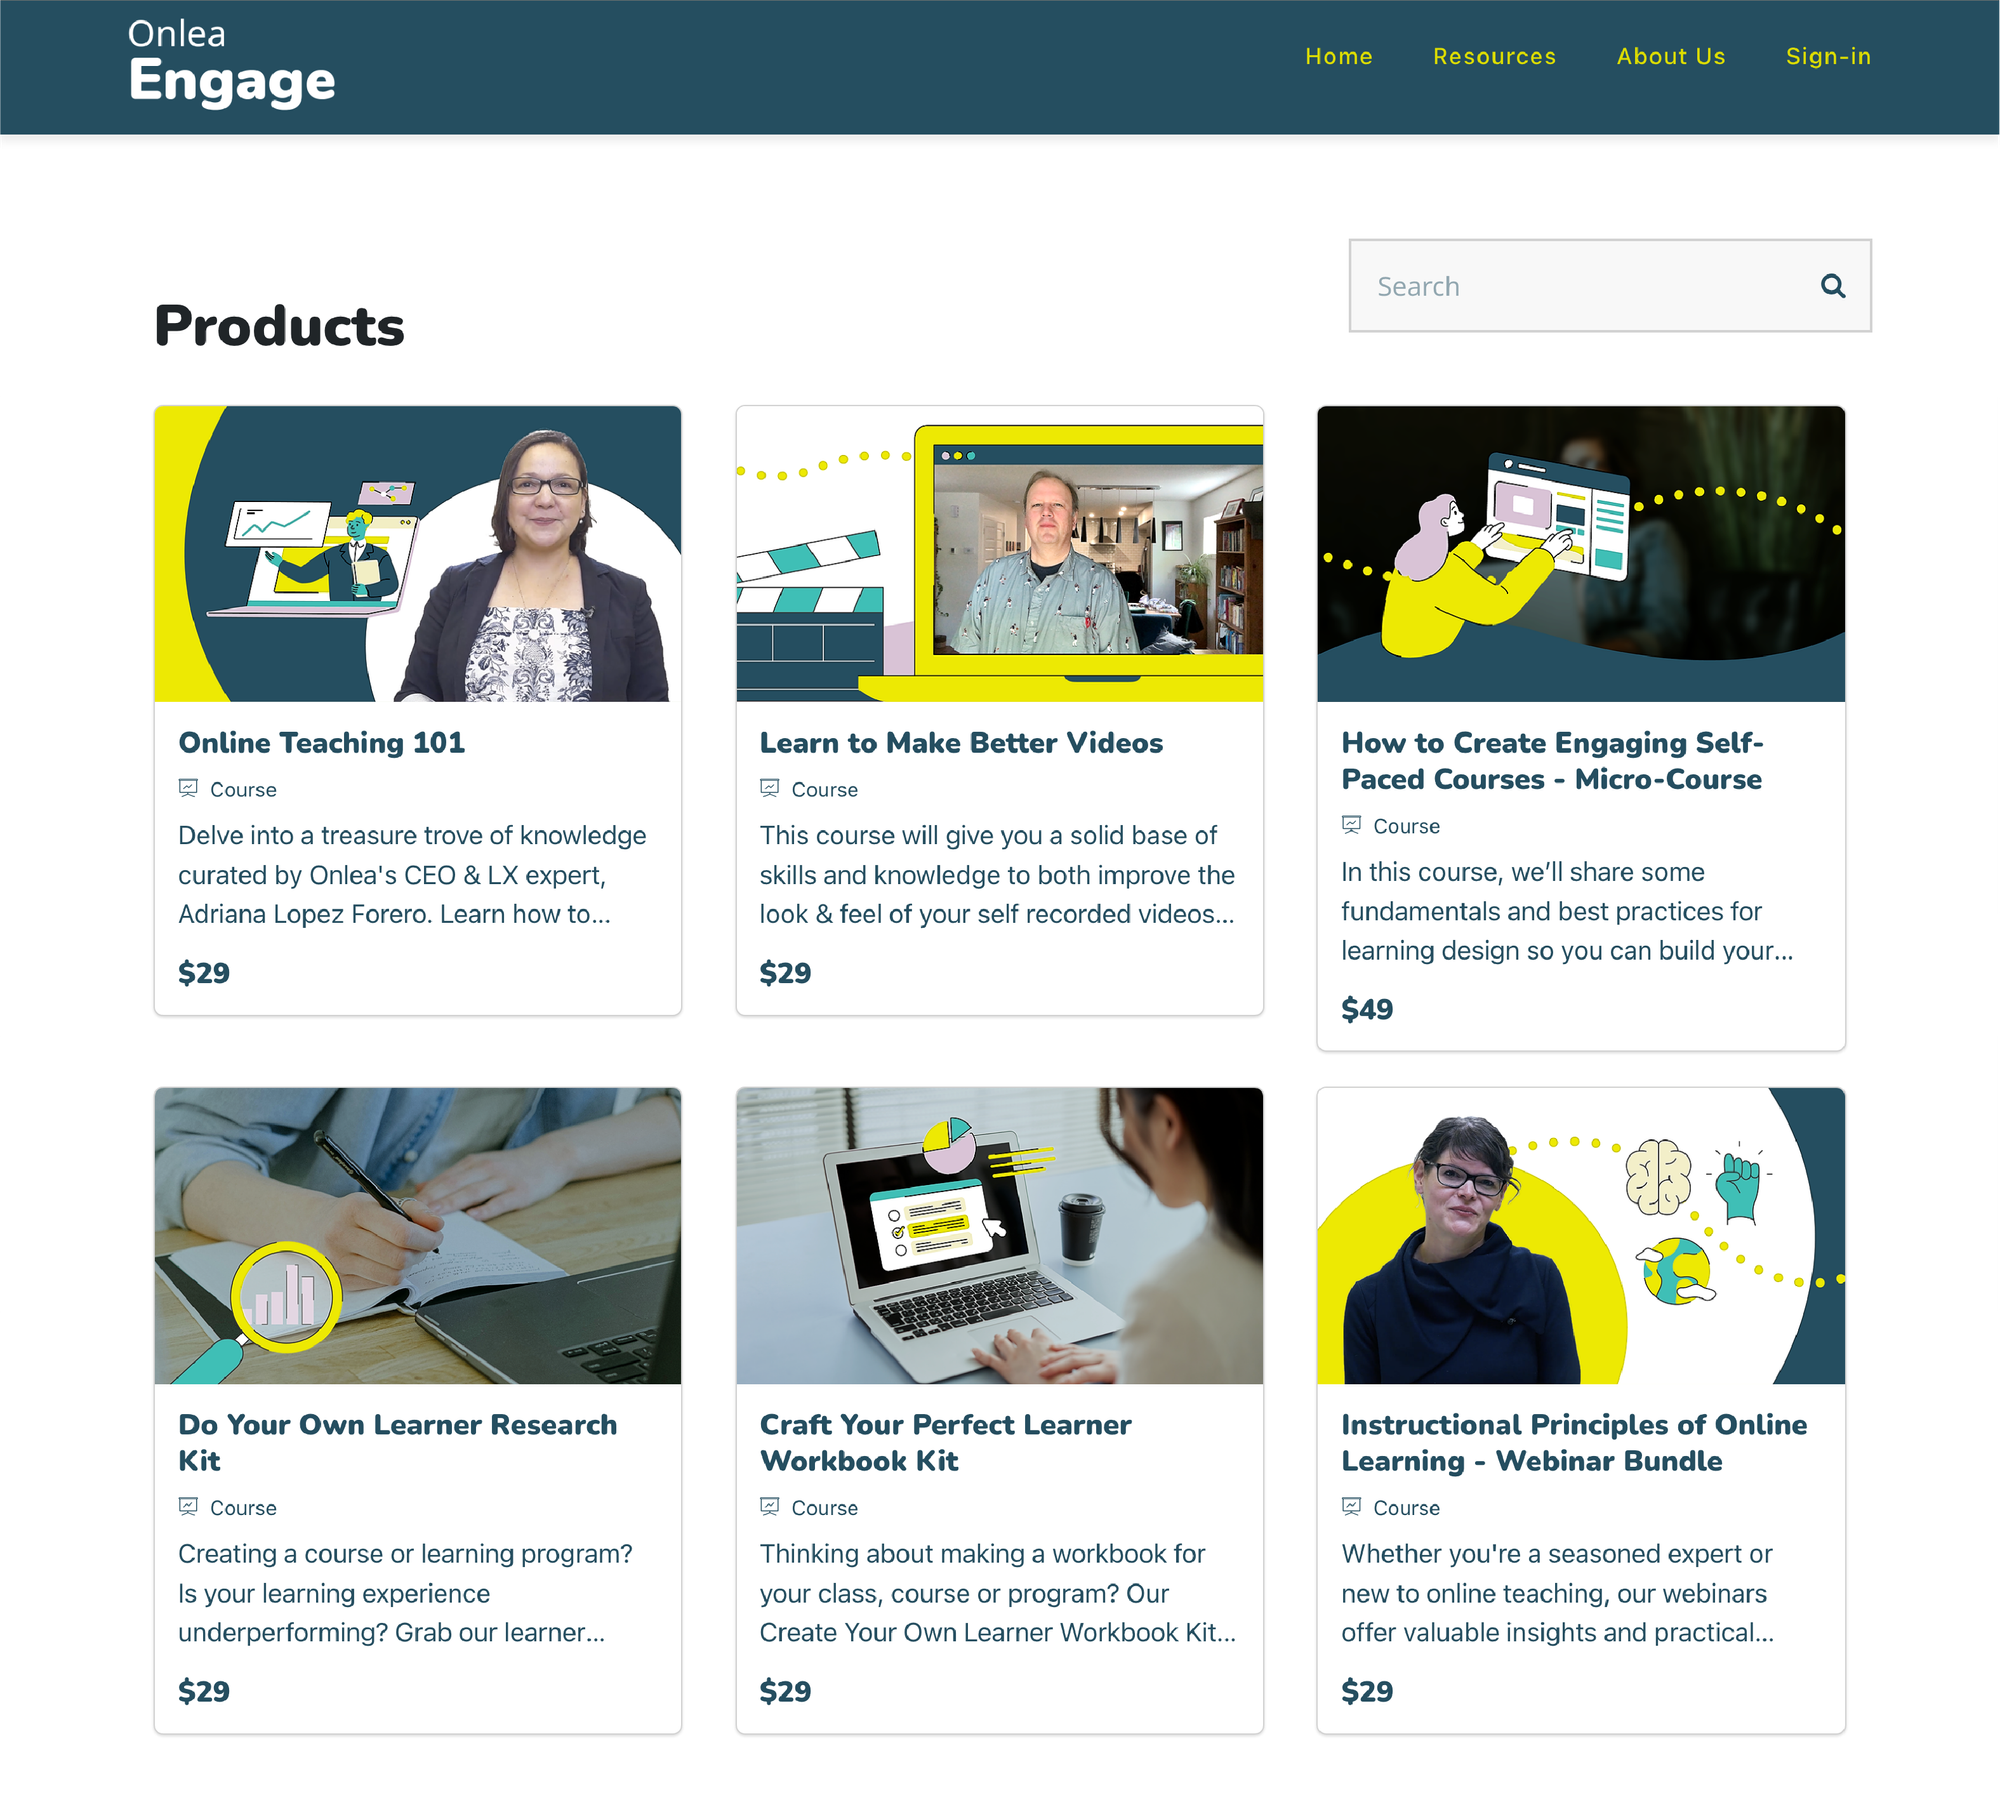 Meet Onlea Engage: The LX Store Reimagined